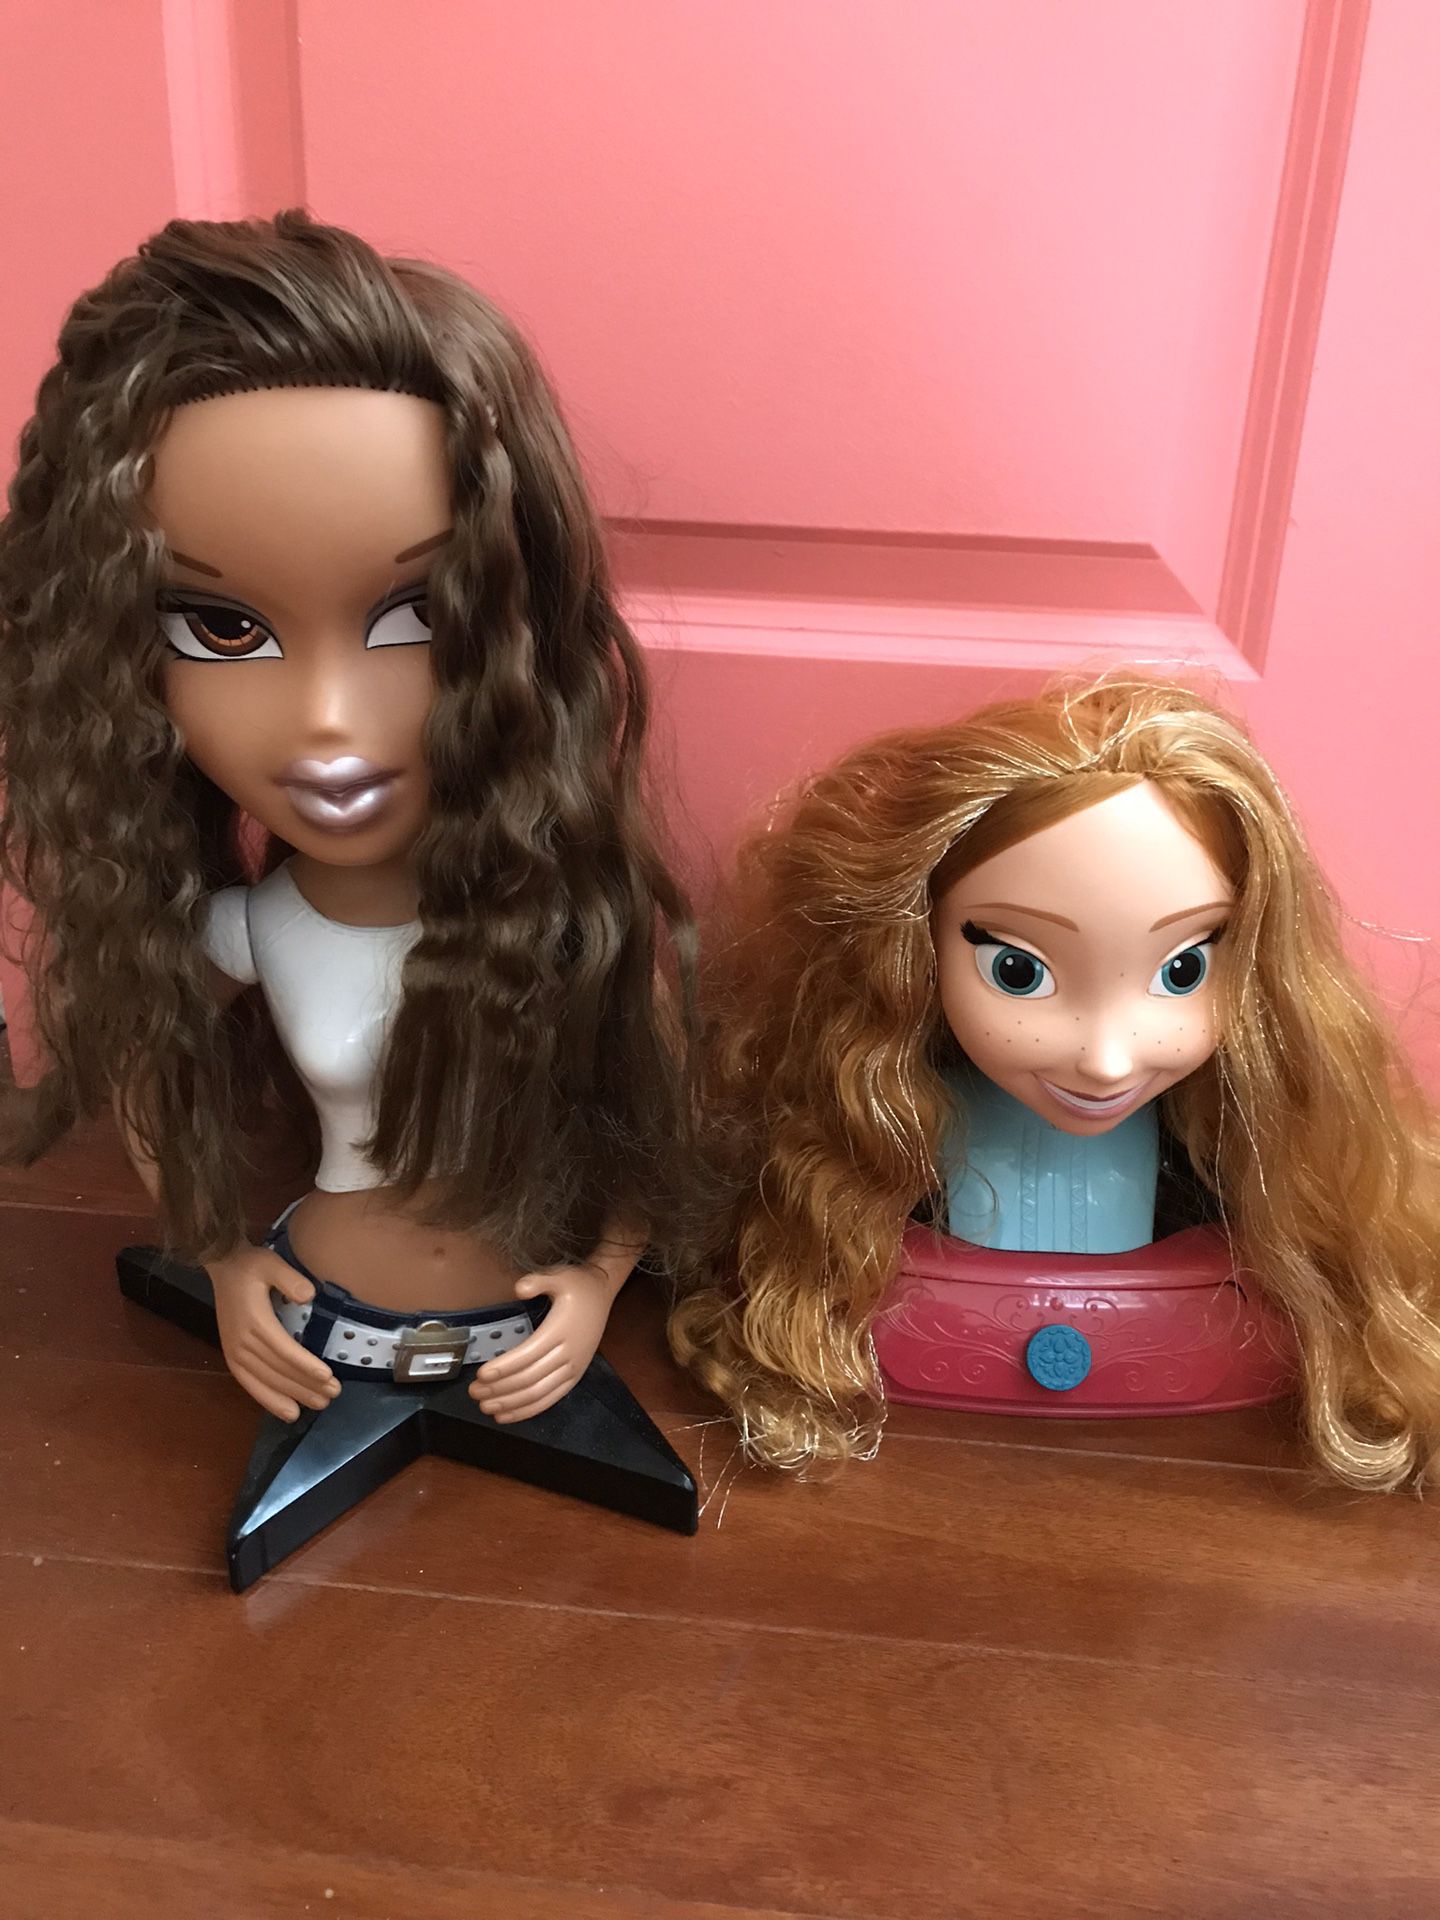 Hair styling heads